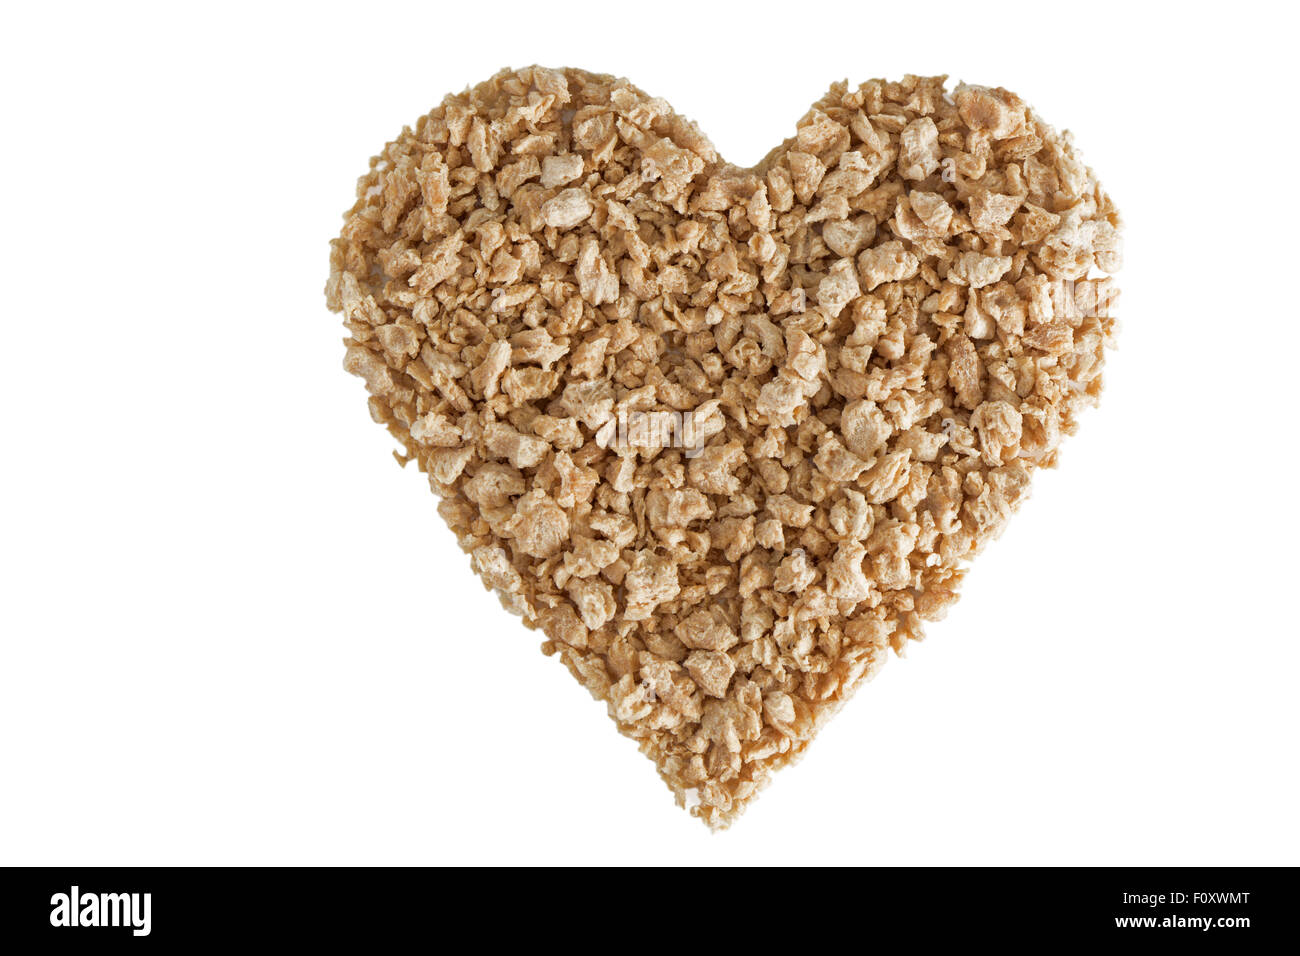 Heart shape made of textured soy protein granules viewed from above, isolated on white background. Stock Photo